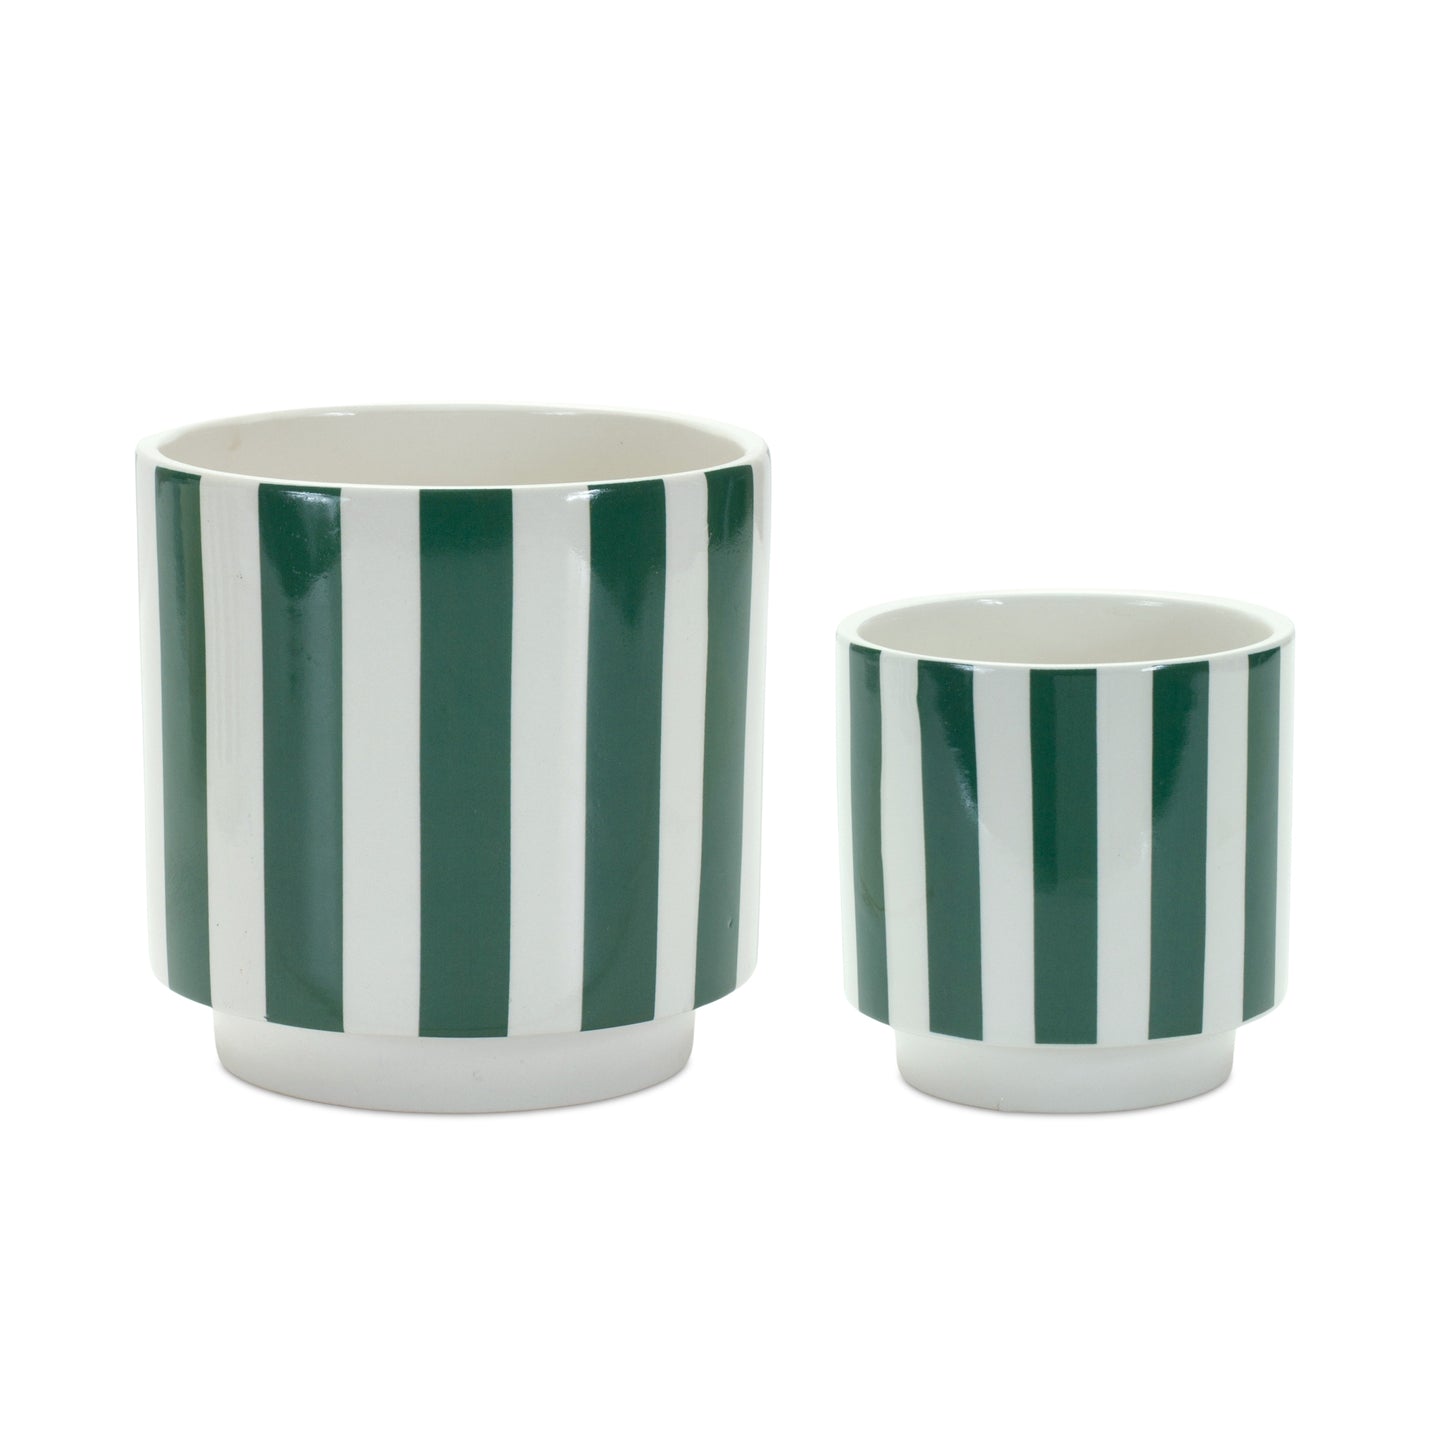 Green and White Striped Planter (Set of 2)